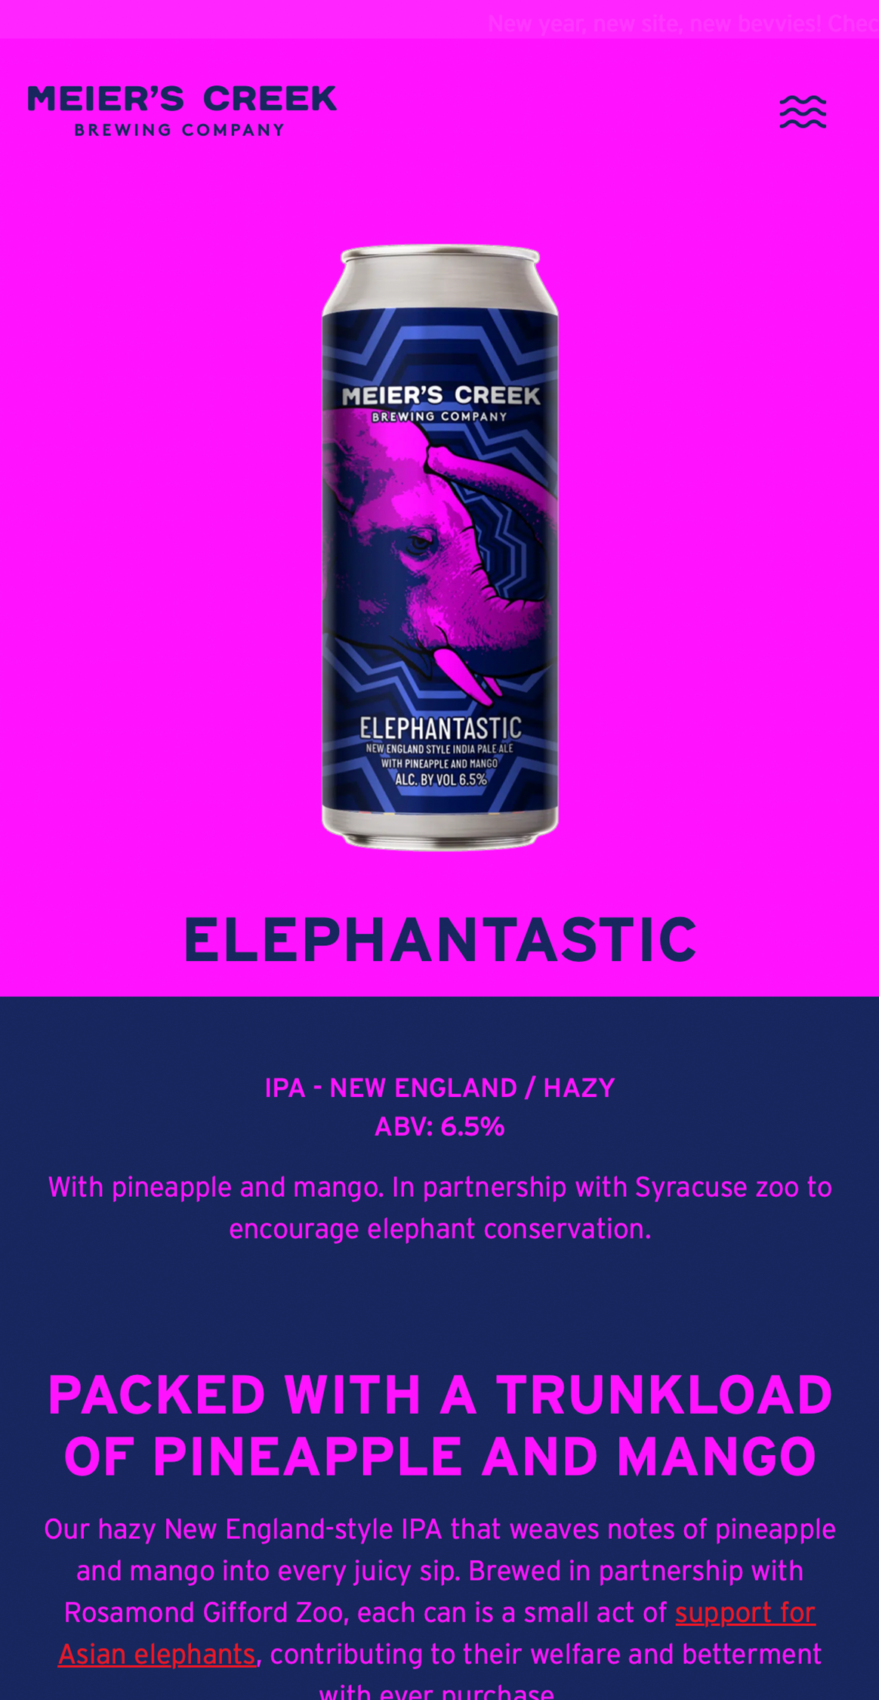 A page from Meier's Creek Brewing Company's beer archive showing their Elephantastic beer, which raised funds for Rosamond Gifford Zoo's elephant sanctuary